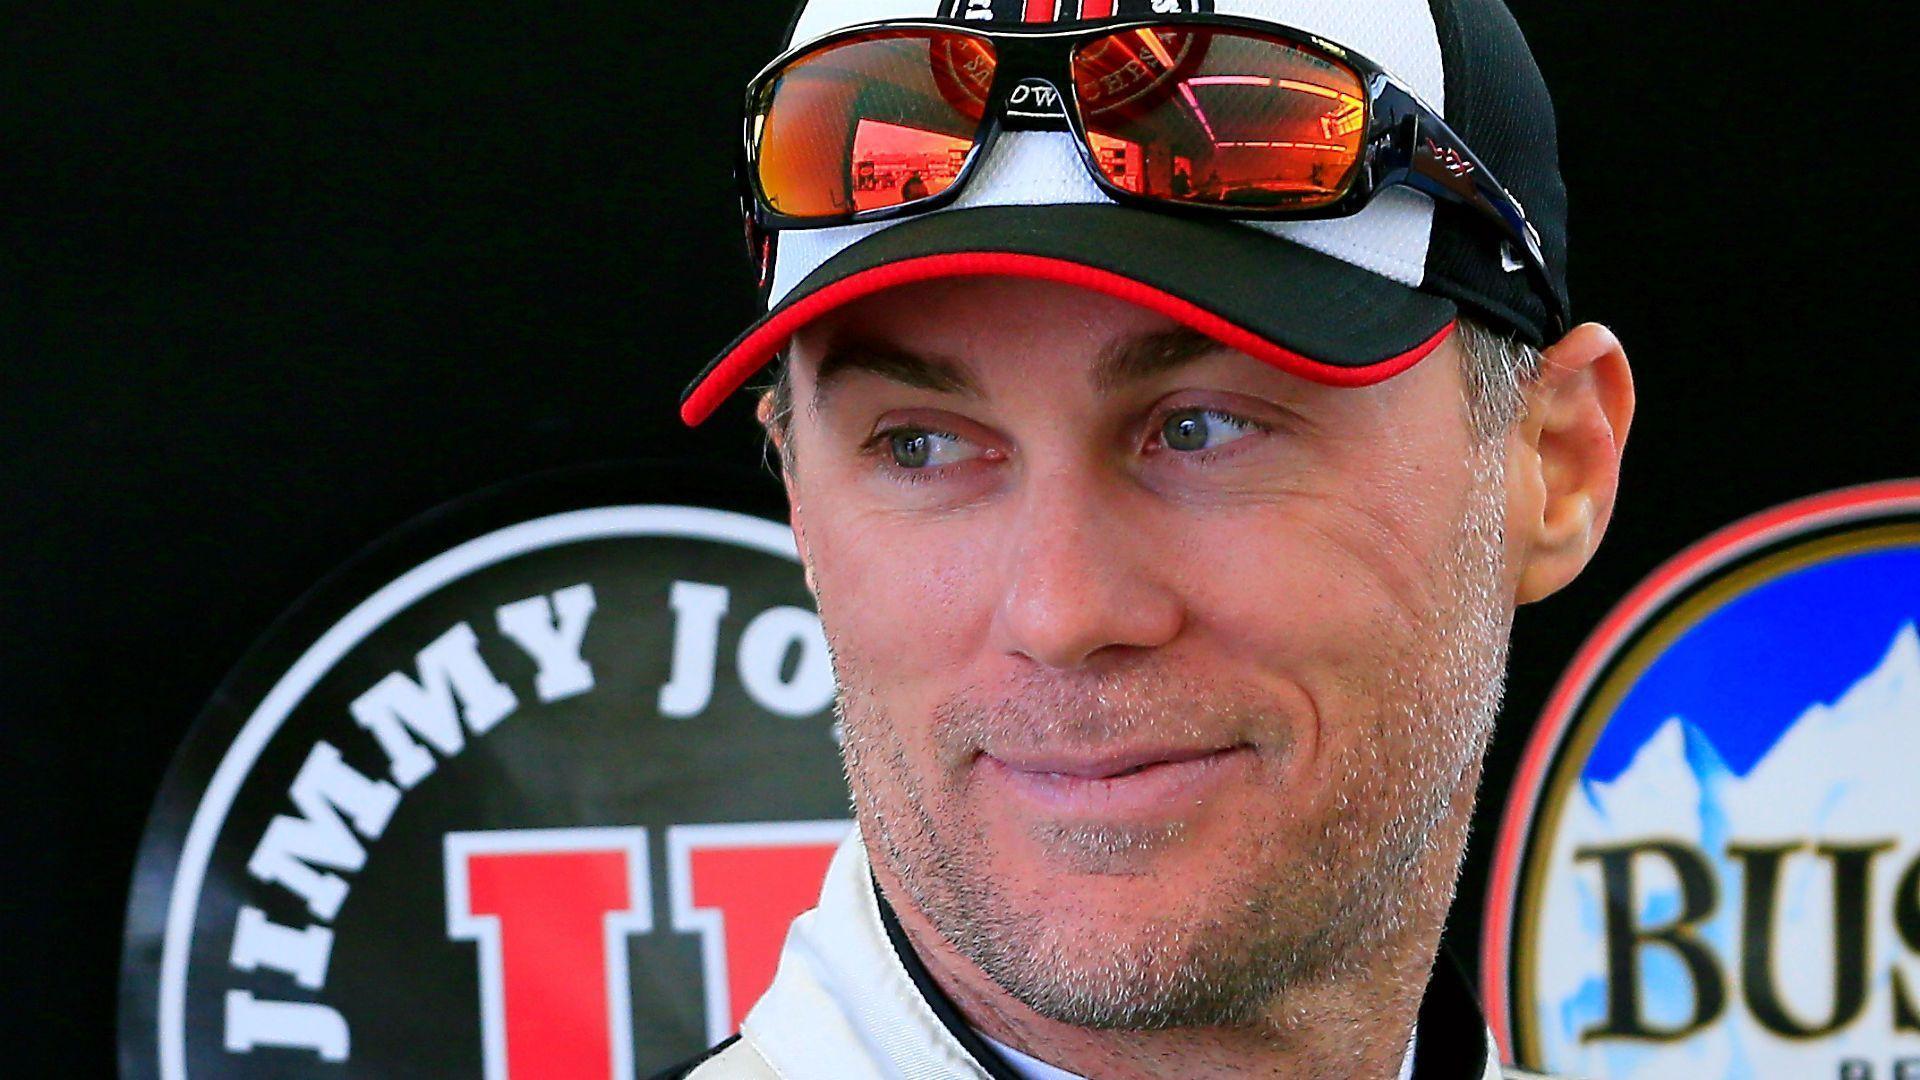 Kevin Harvick ends speculation on future, extends pact with